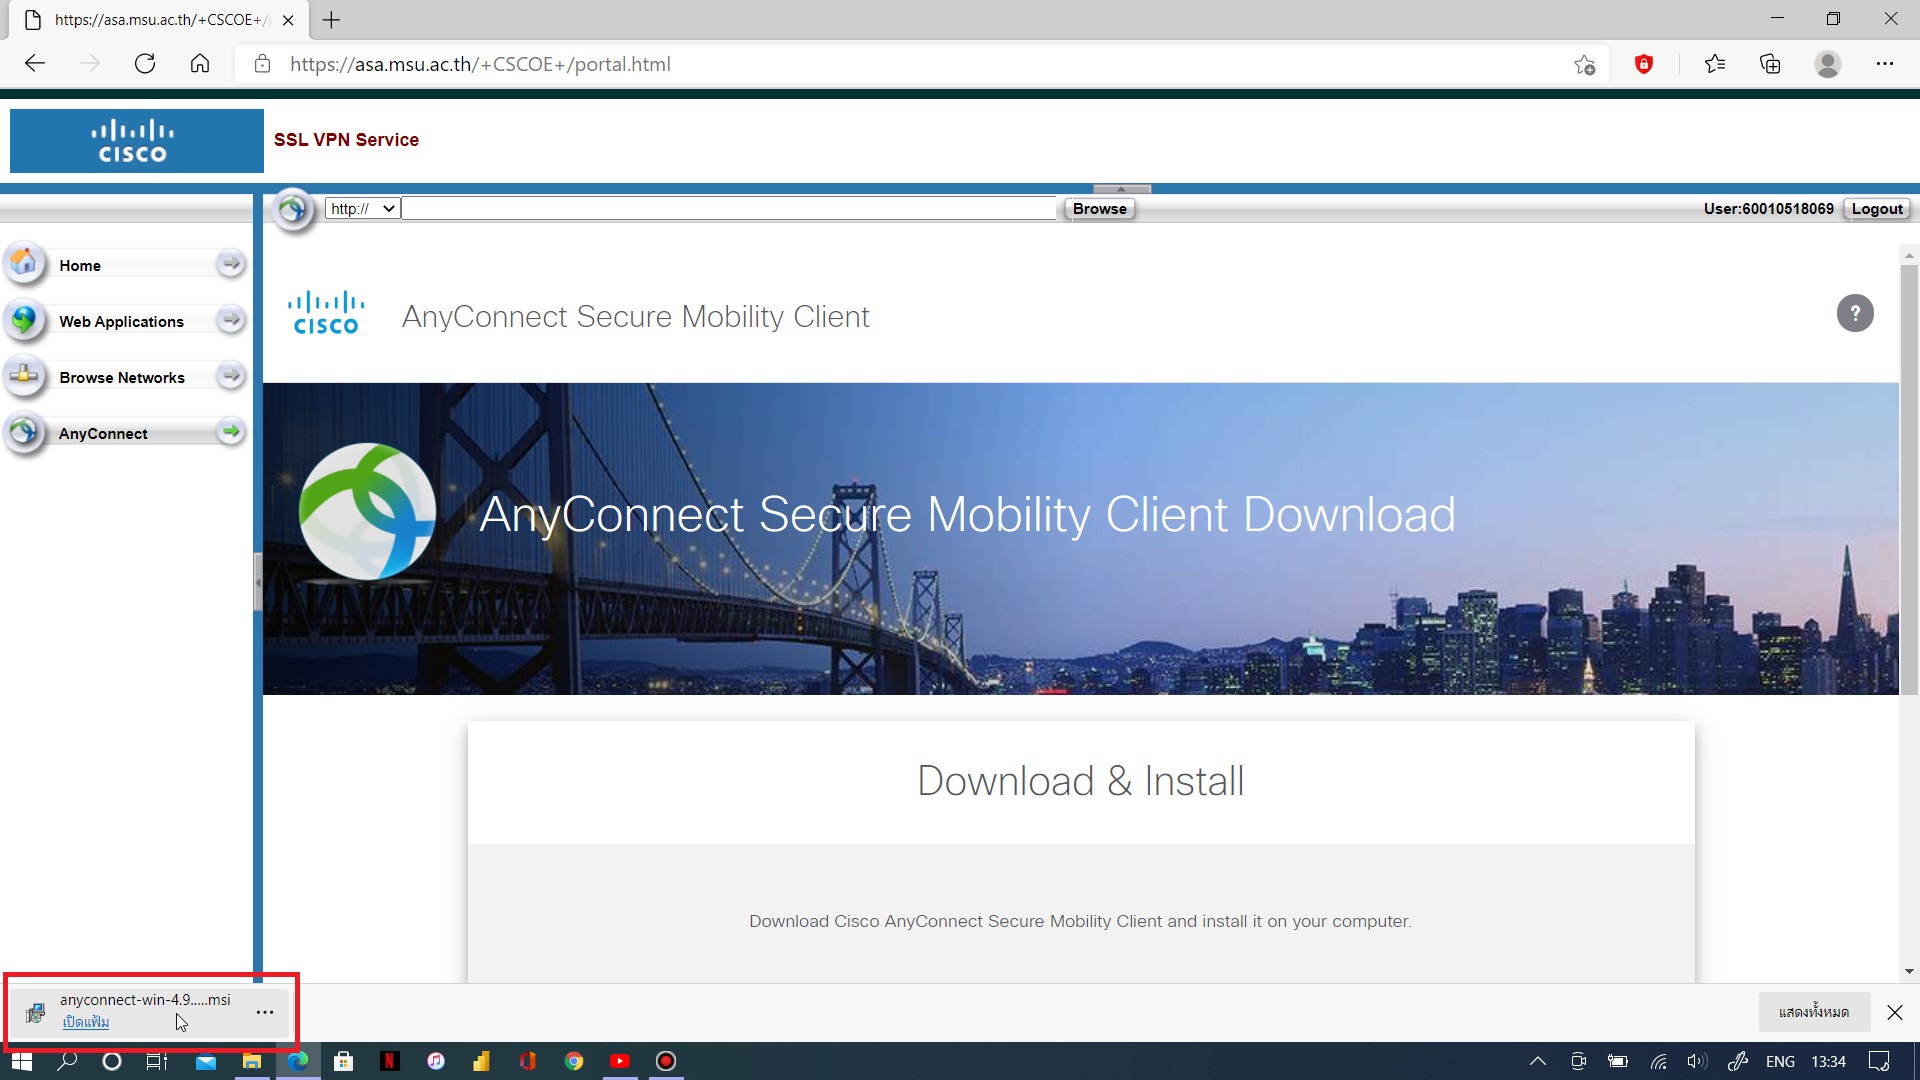 cisco anyconnect mobility client windows 10 download